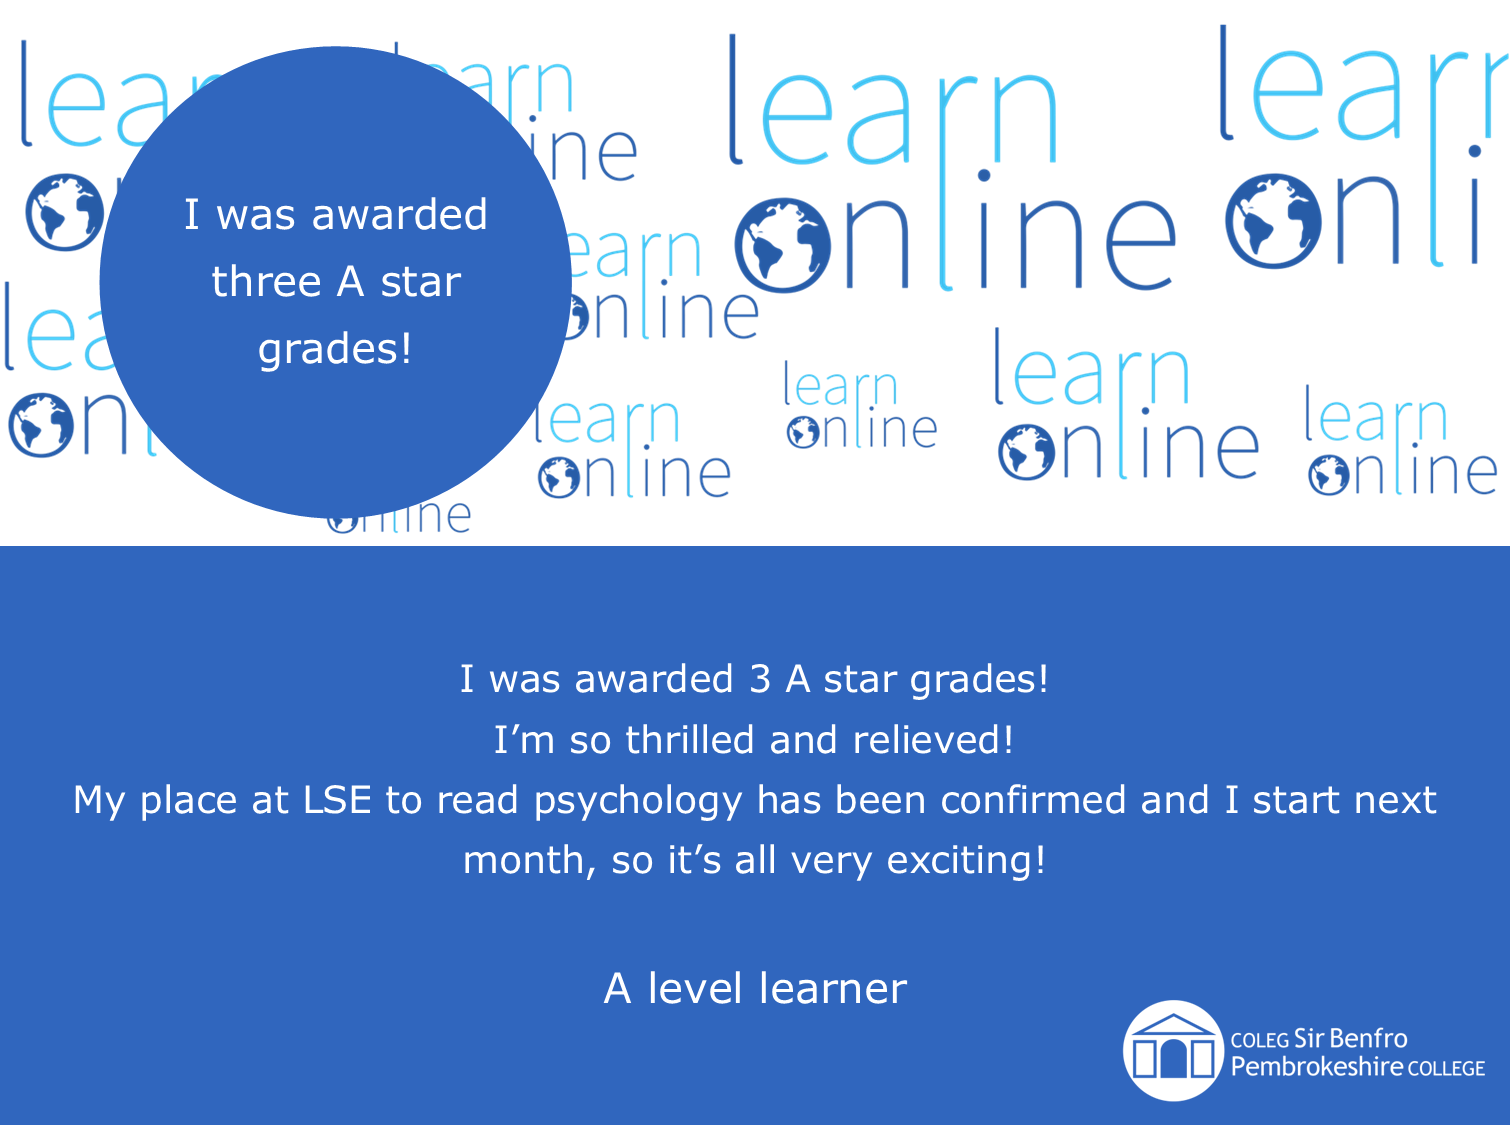 LearnOnline testimonial 'I was awarded three A star grades!' I was awarded 3 A star grades! I’m so thrilled and relieved! My place at LSE to read psychology has been confirmed and I start next month, so it’s all very exciting! A level learner